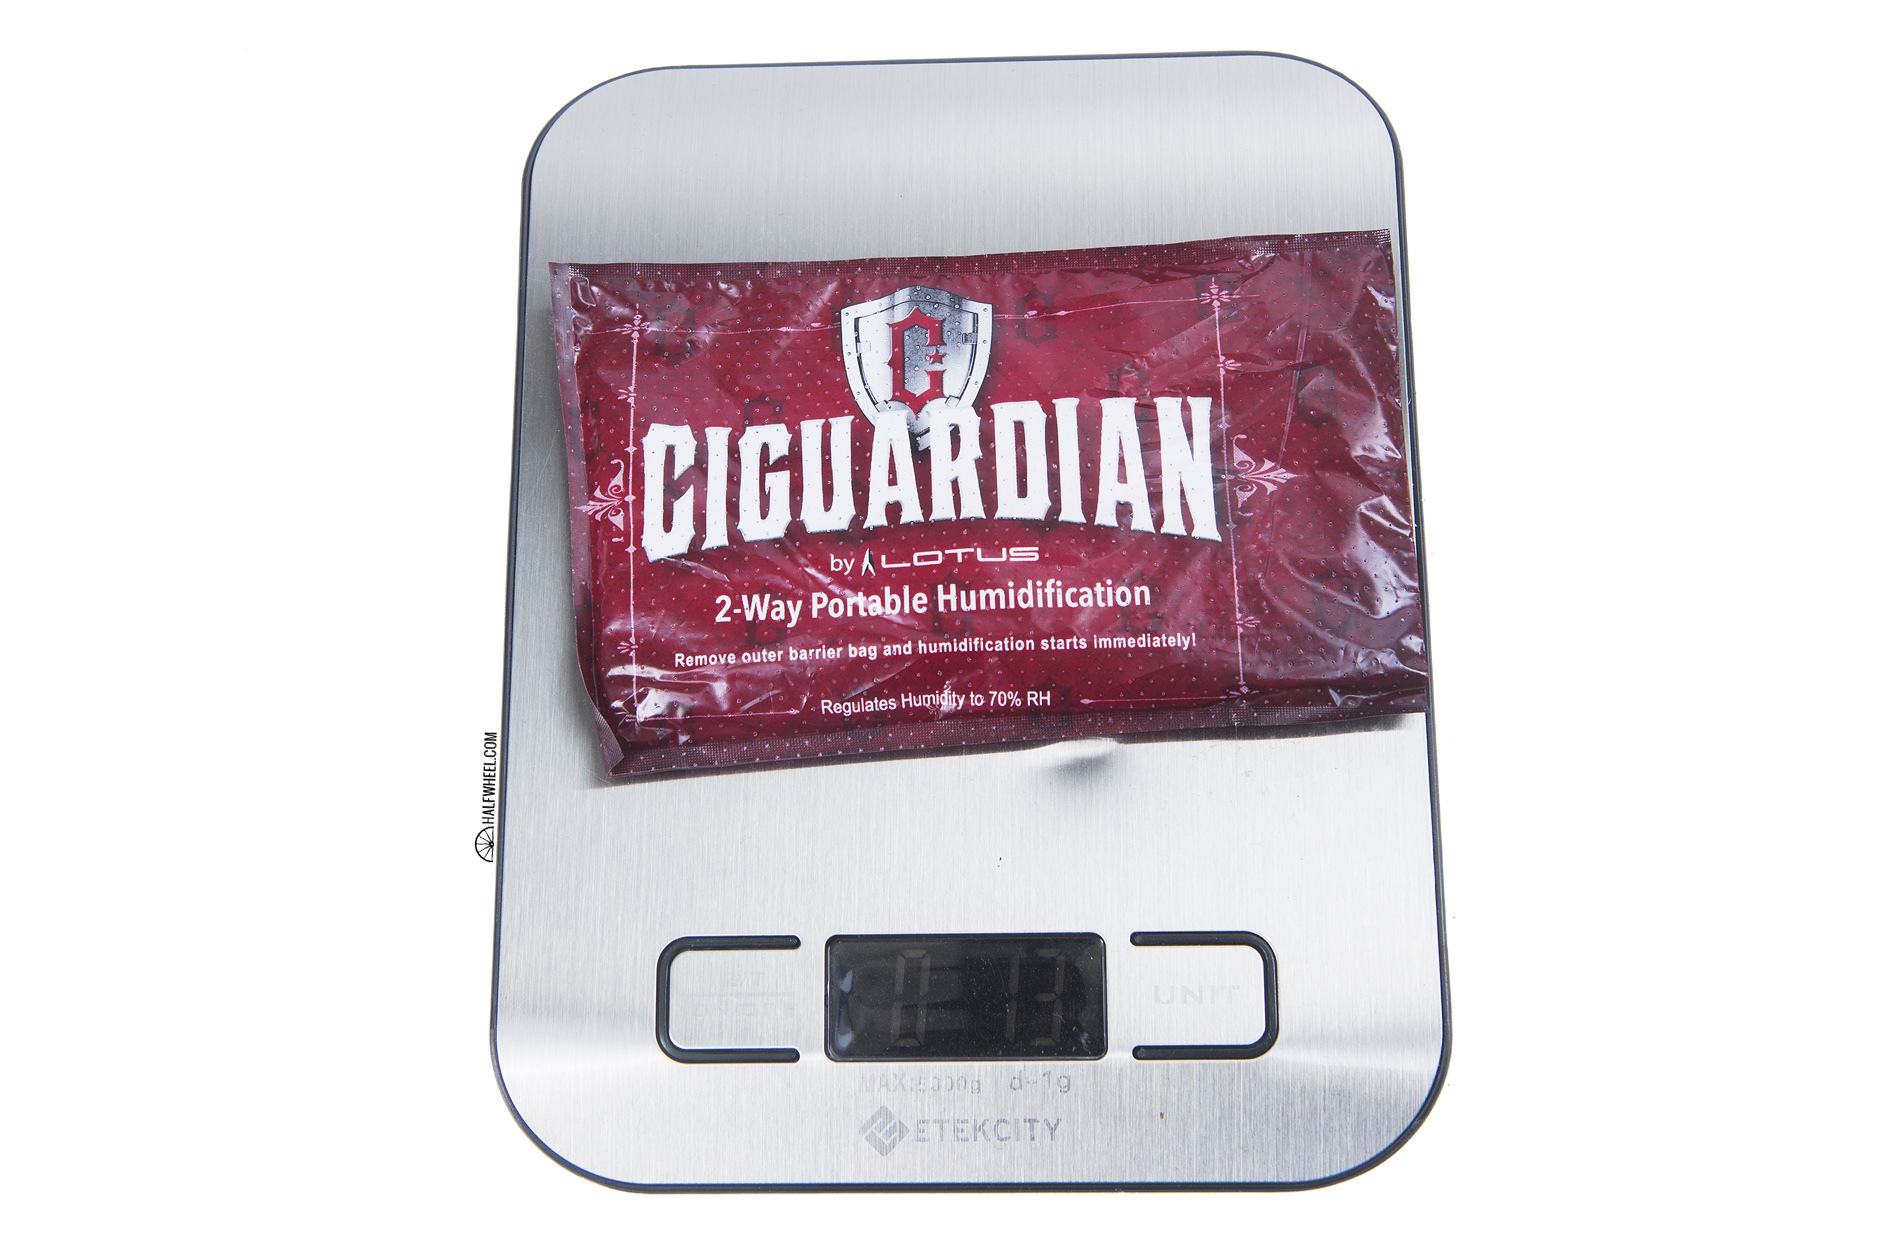 Ciguardian Humidification Pack weight